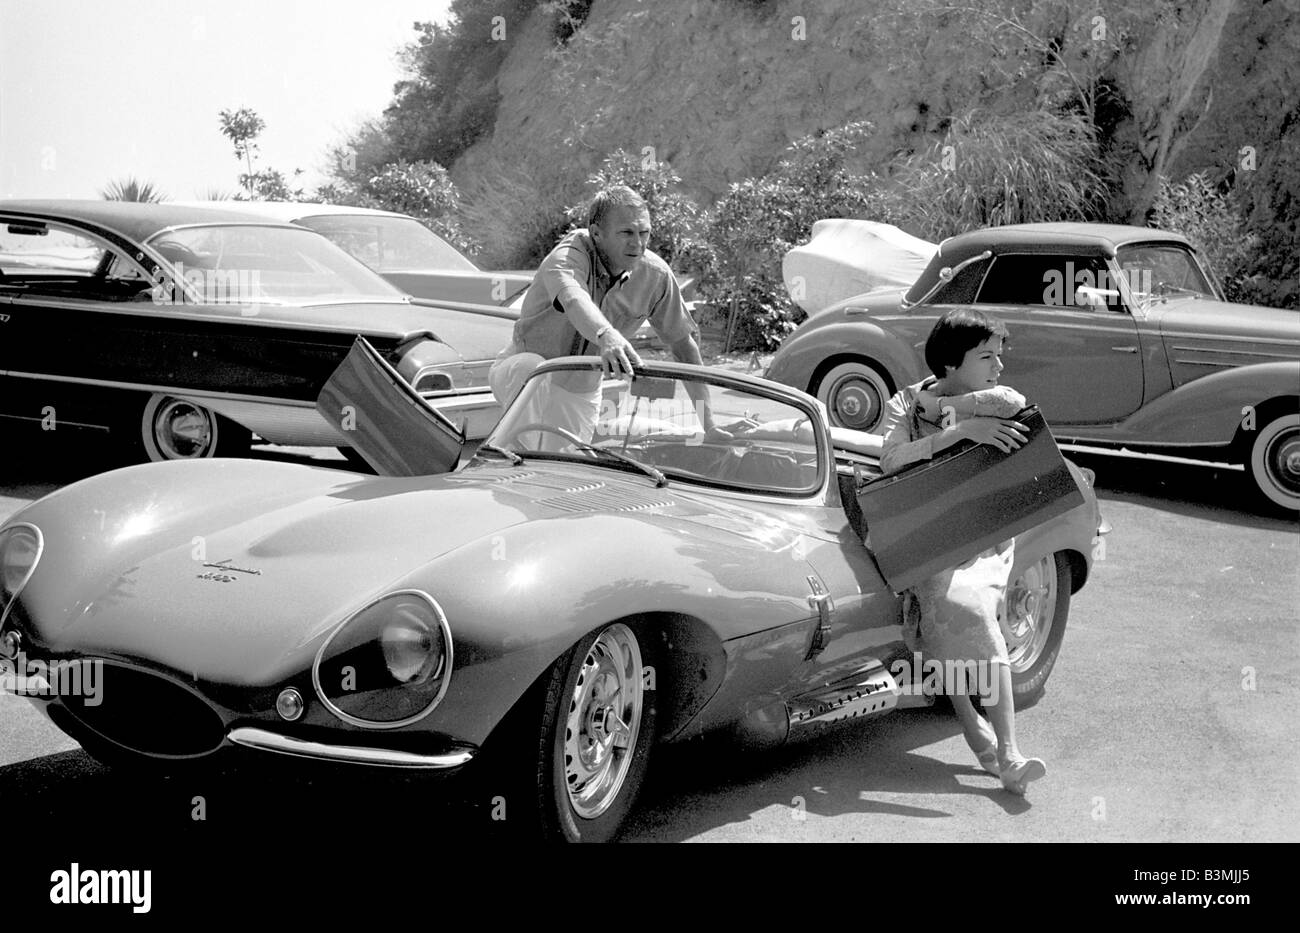 steve-mcqueen-us-film-star-with-wife-nellie-and-some-of-their-cars-B3MJJ5.jpg